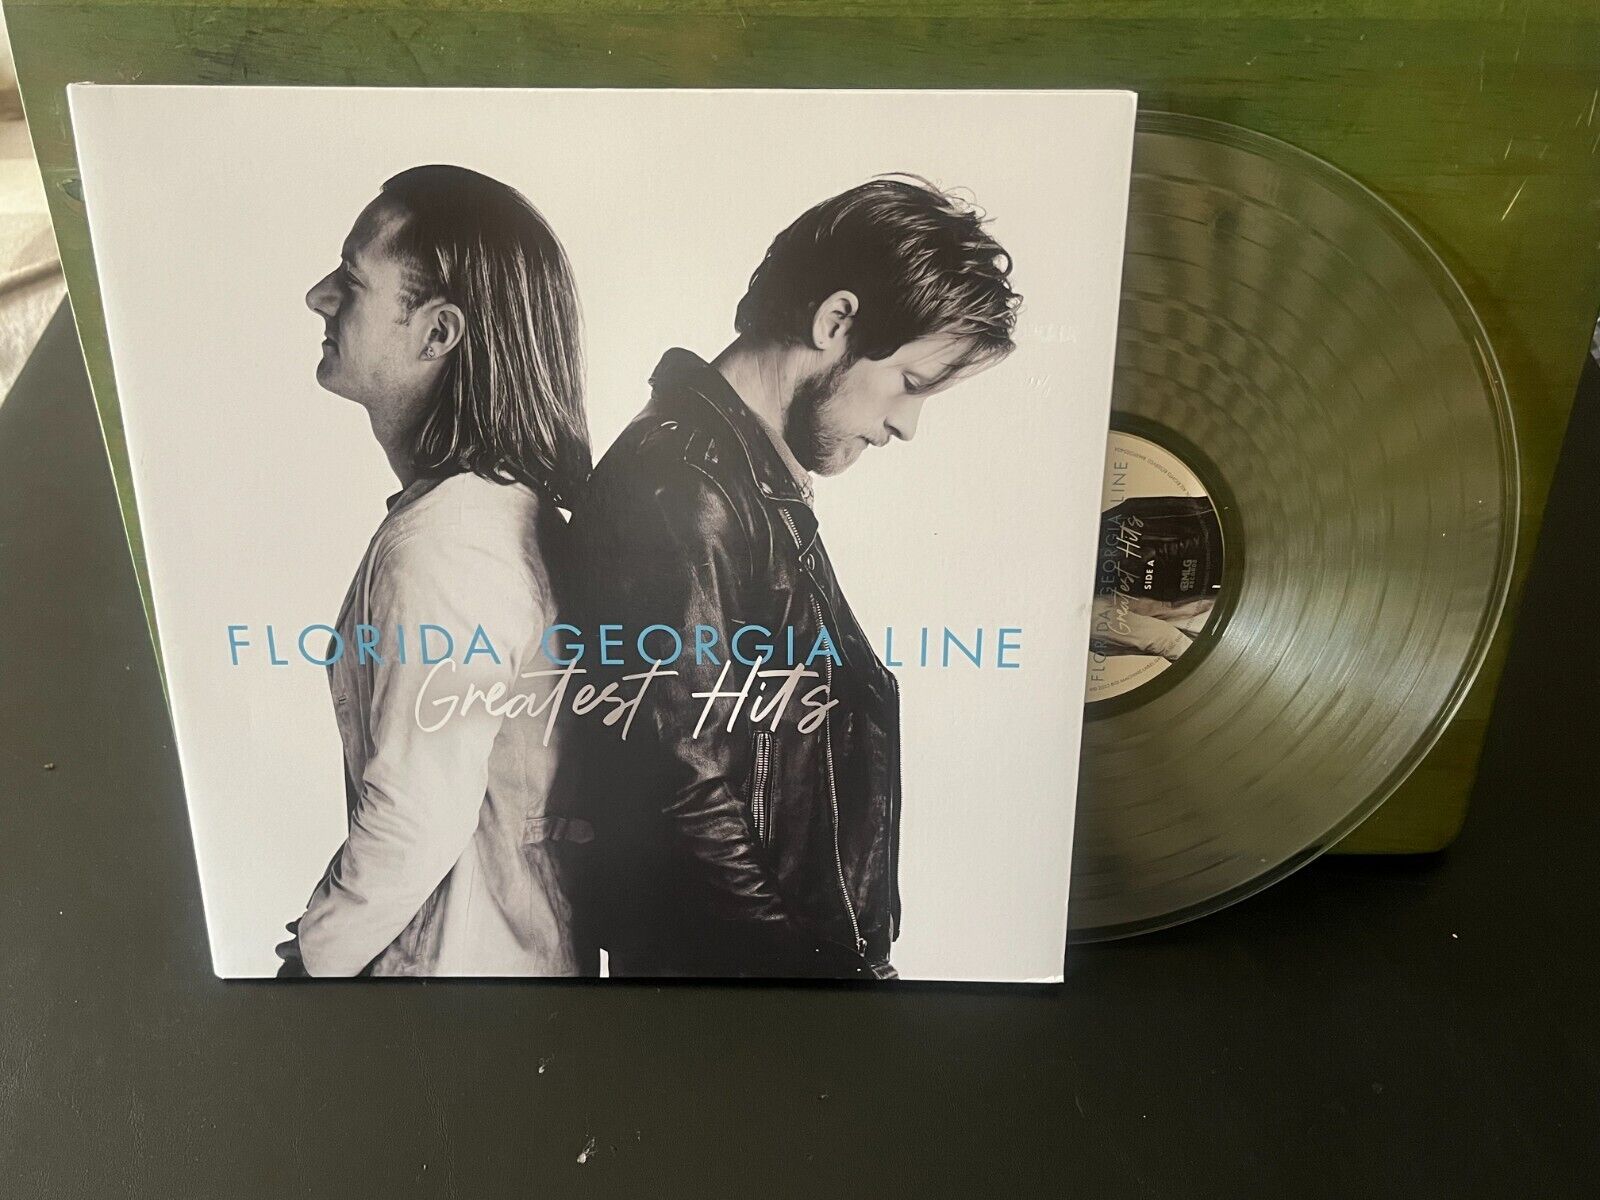 Florida Georgia Line - Greatest Hits (Limited Edition, Clear Vinyl LP) USED